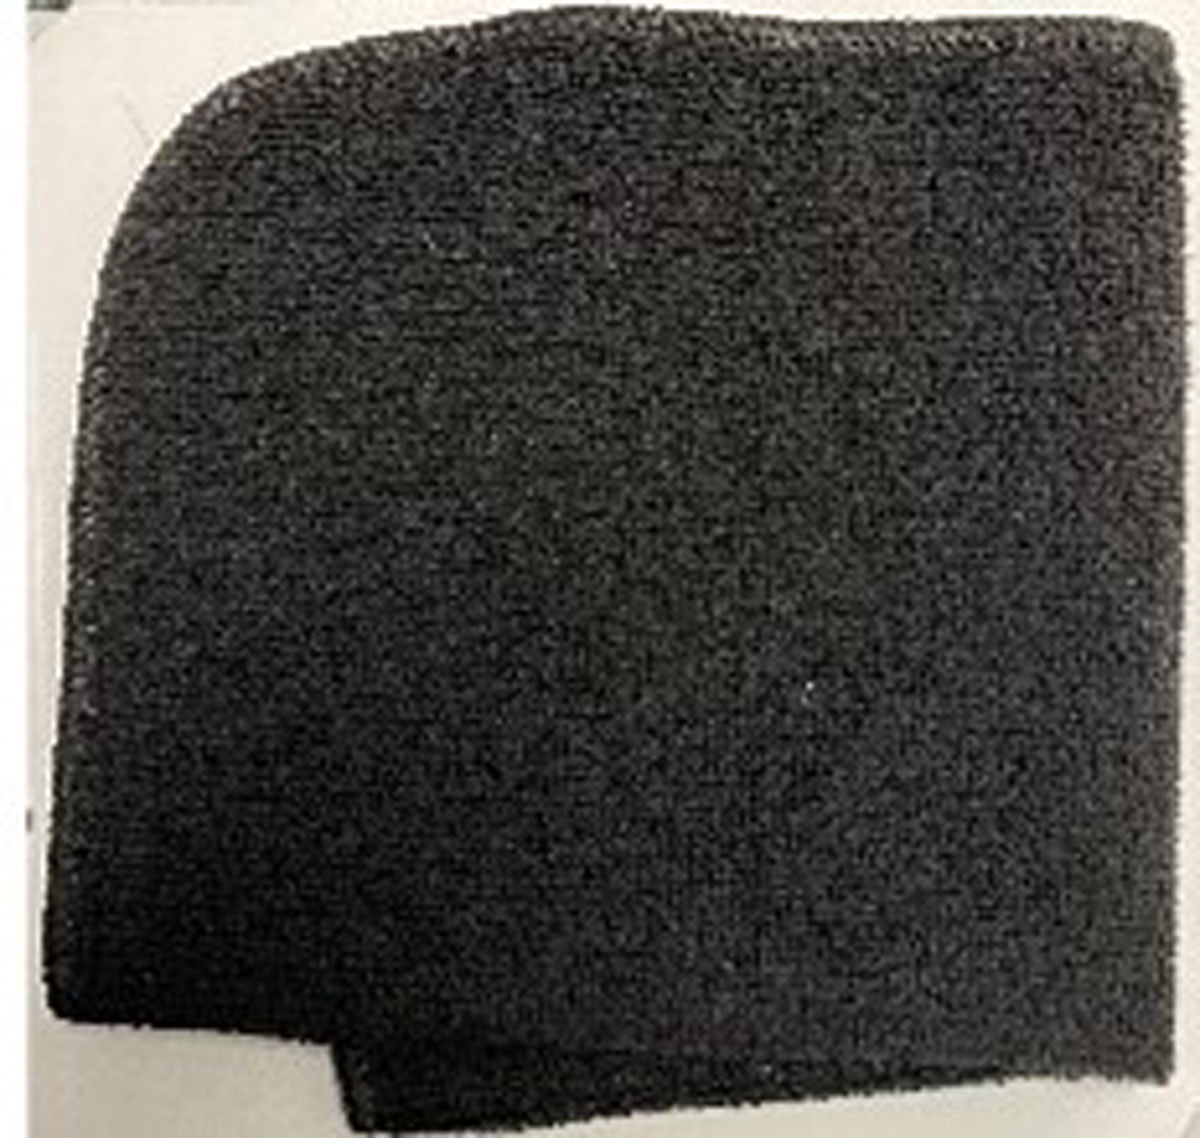 What's the fabric weight of these black microfiber towels?